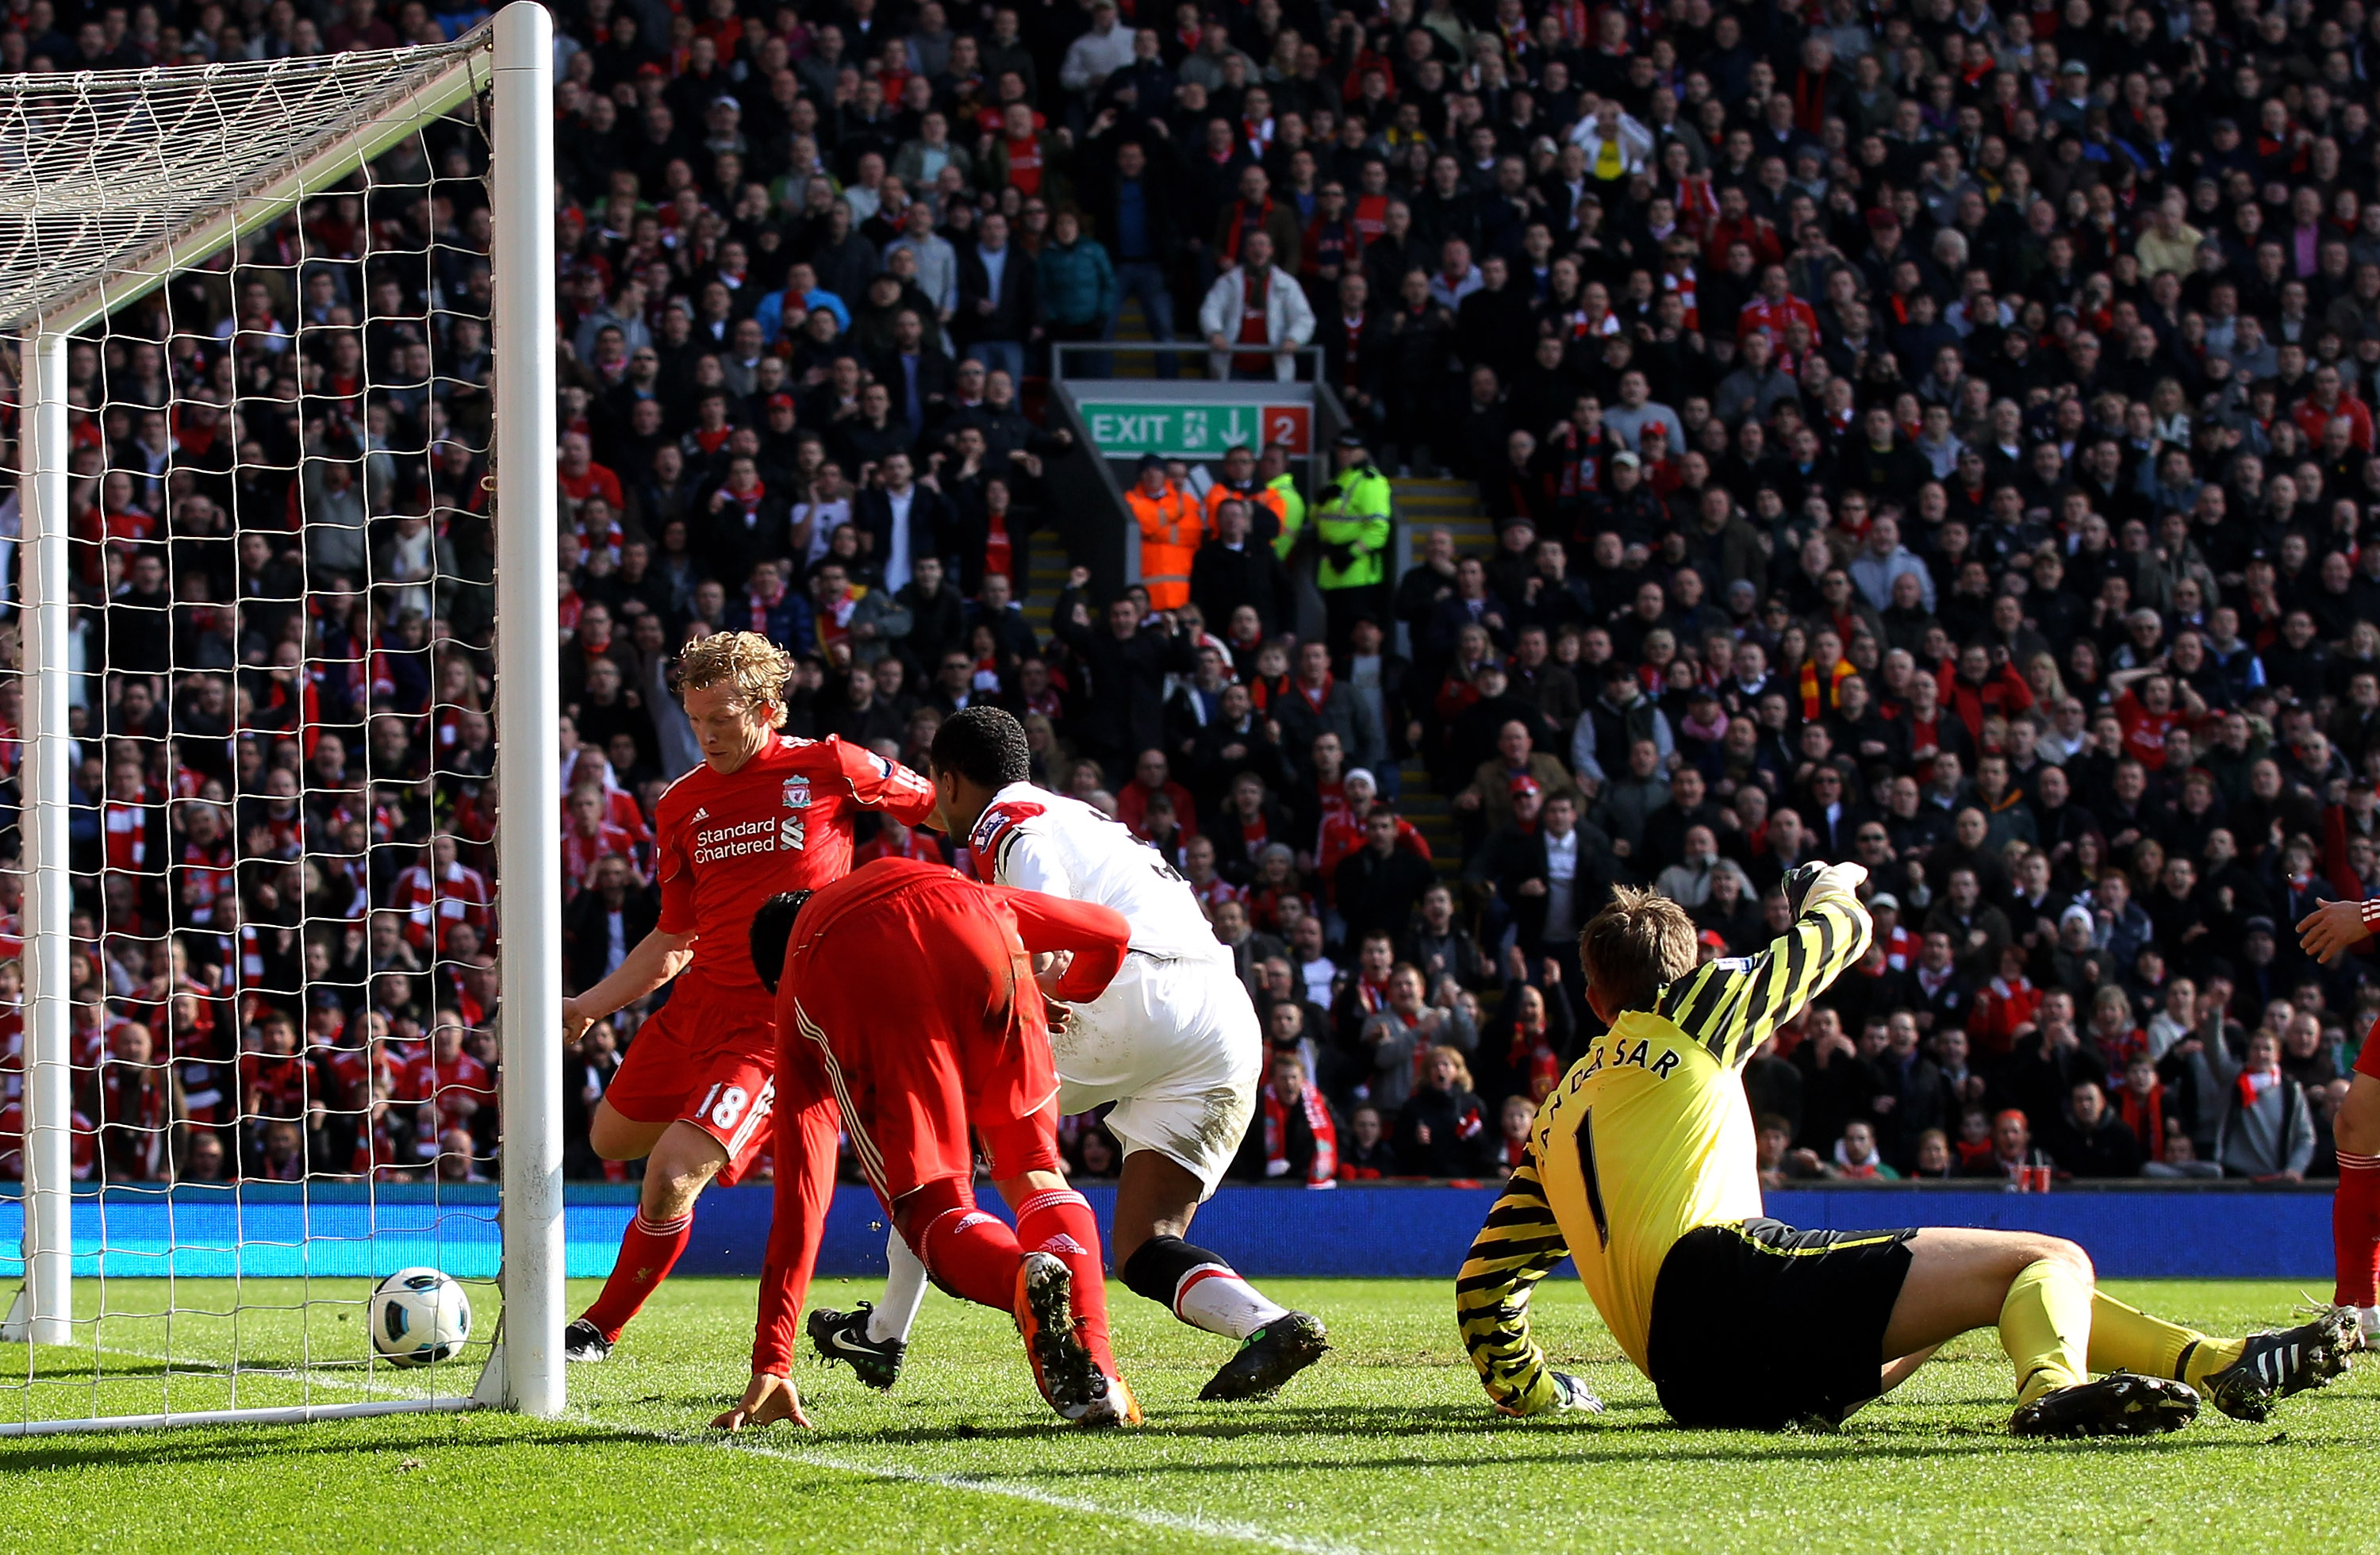 LIVERPOOL, UNITED KINGDOM - MARCH 06:  Dirk Kuyt of Liverpool scores the opening goal during the Barclays Premier League match between Liverpool and Manchester United at Anfield on March 6, 2011 in Liverpool, England. (Photo by Alex Livesey/Getty Images)